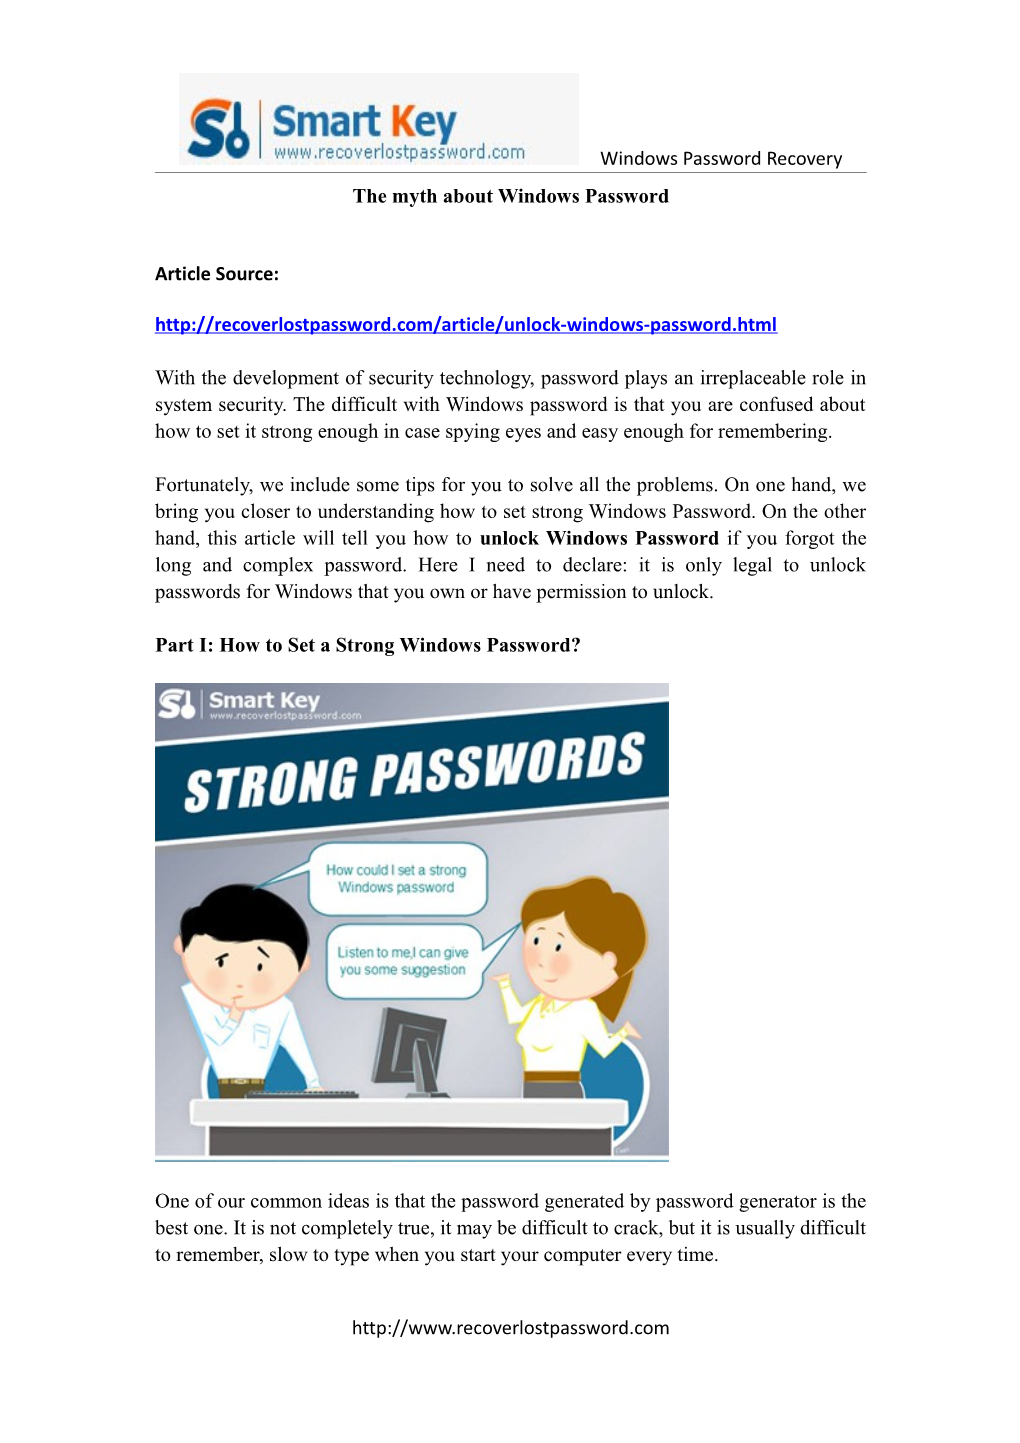 The Myth About Windows Password